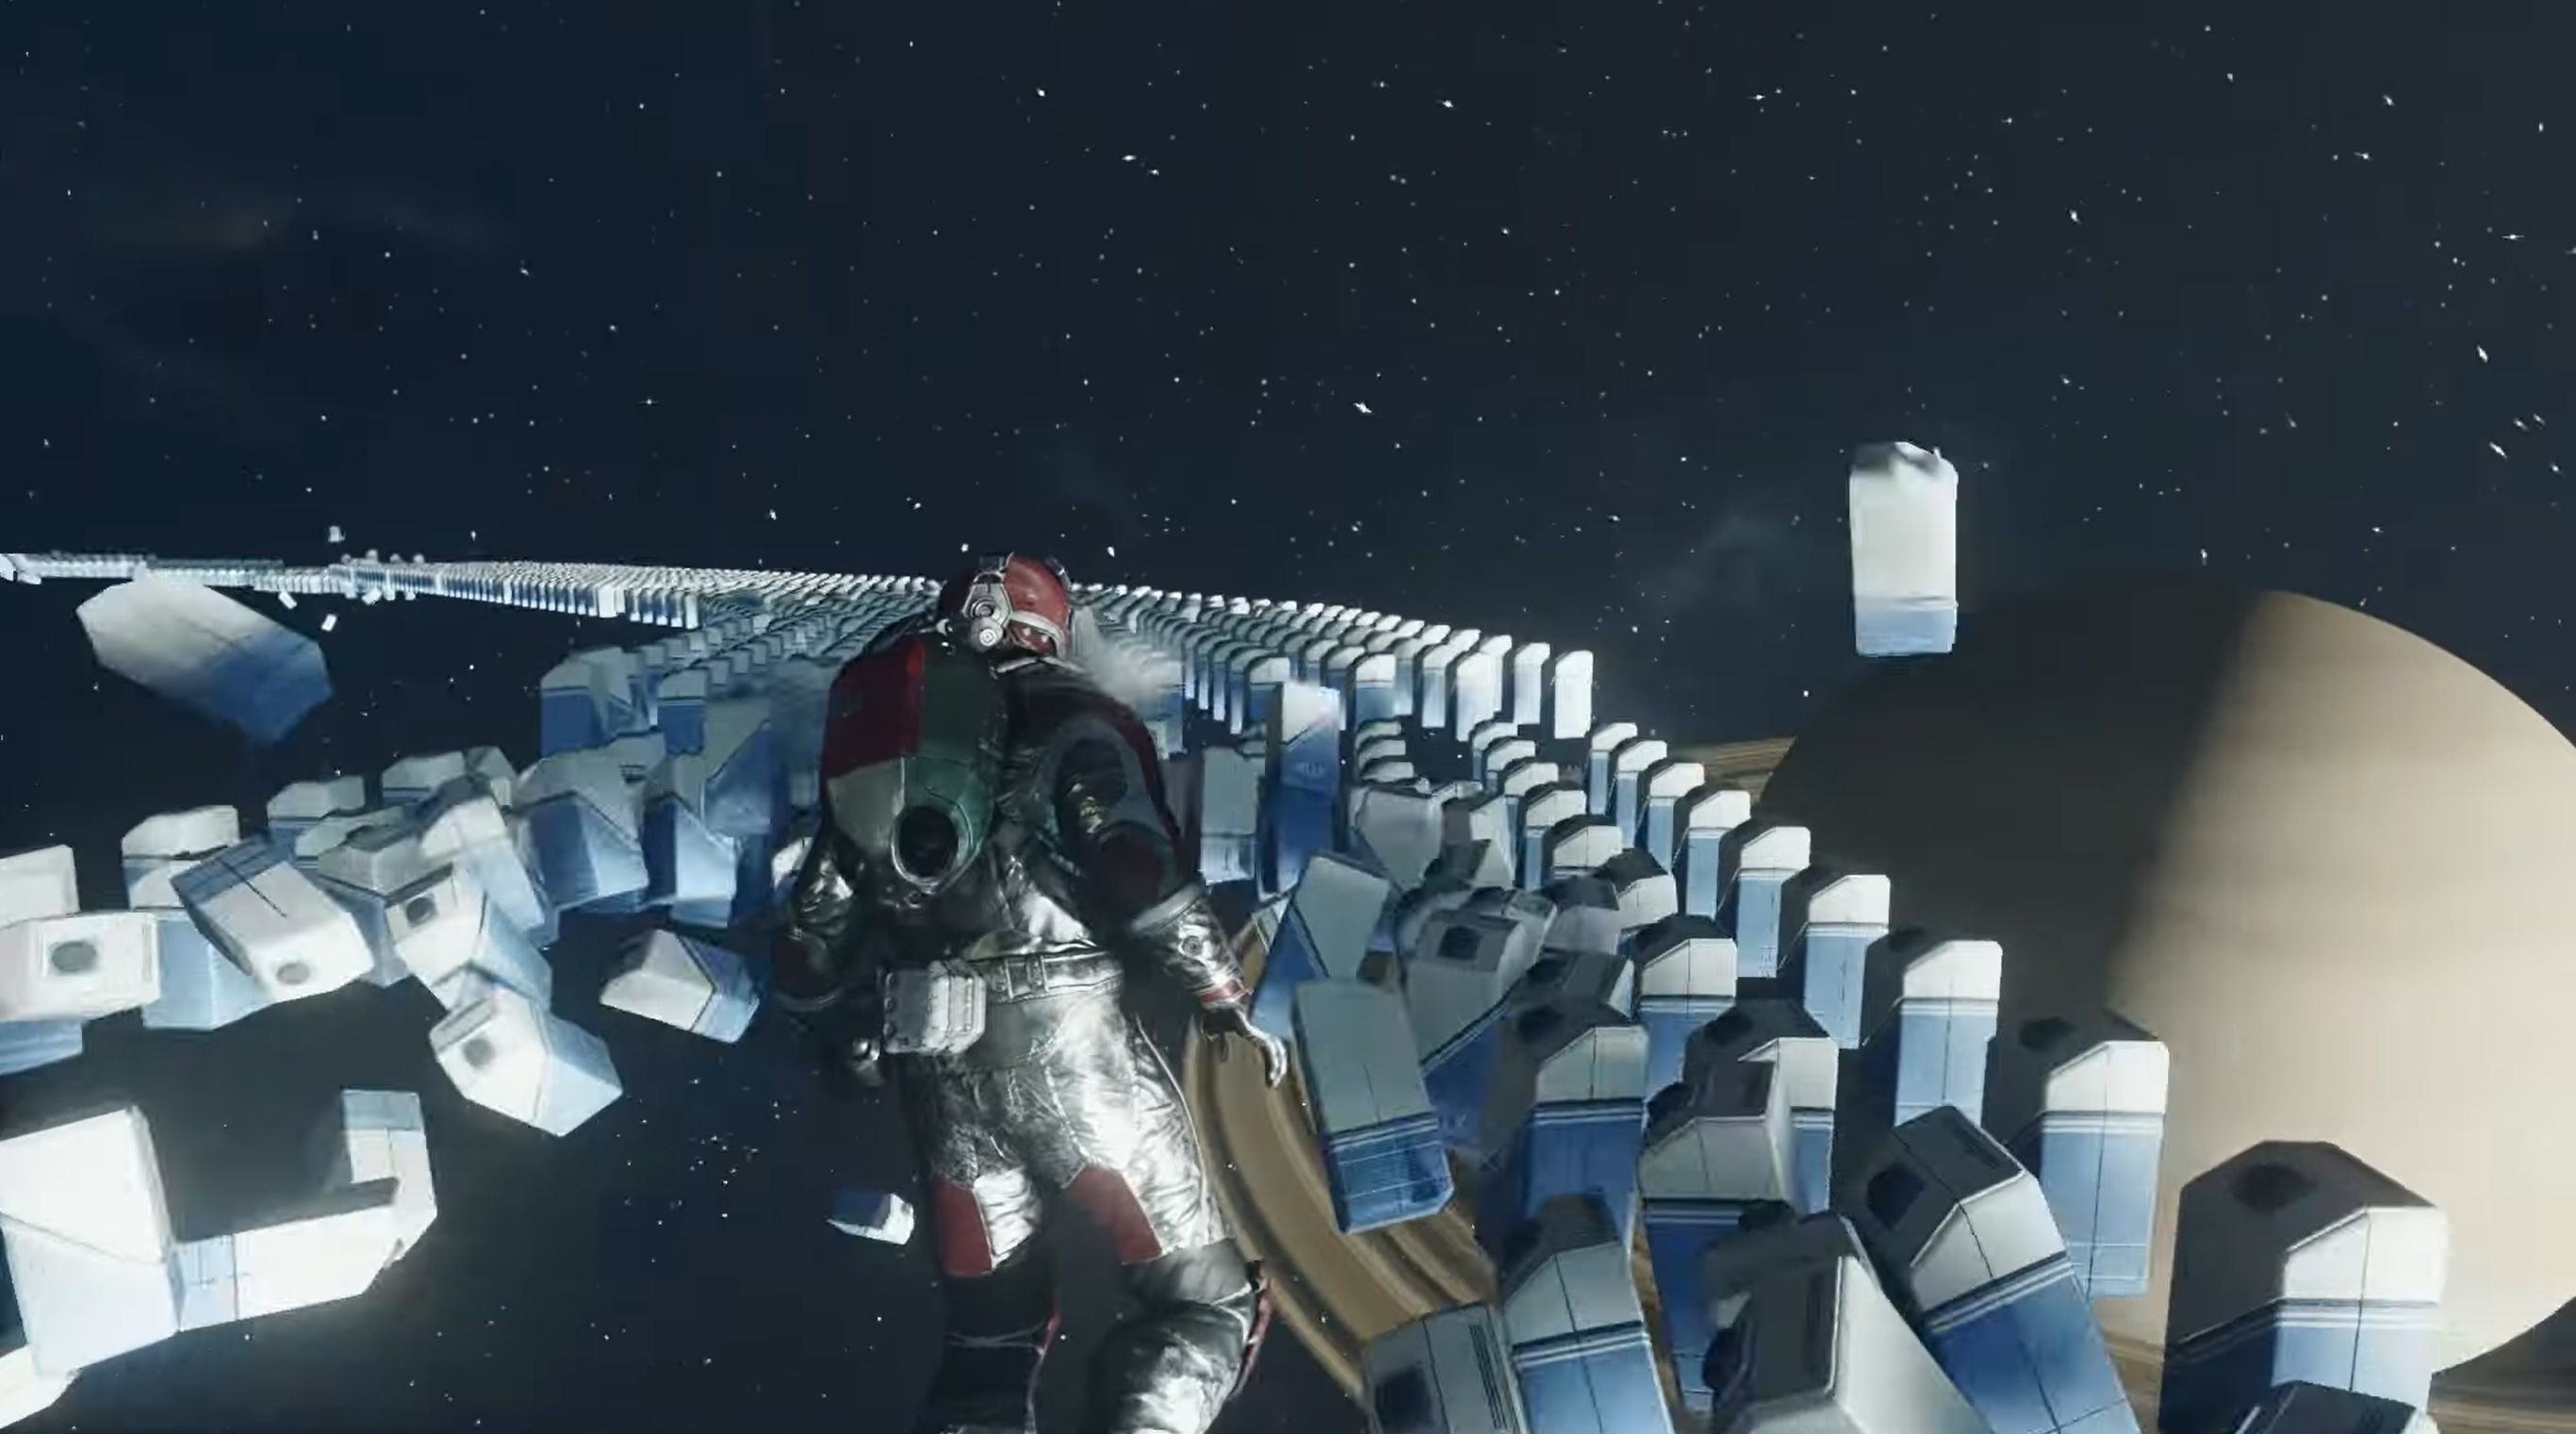  Starfield player spawns thousands of milk cartons in space and smashes into them, resulting in one of the most majestic scenes I've ever witnessed  